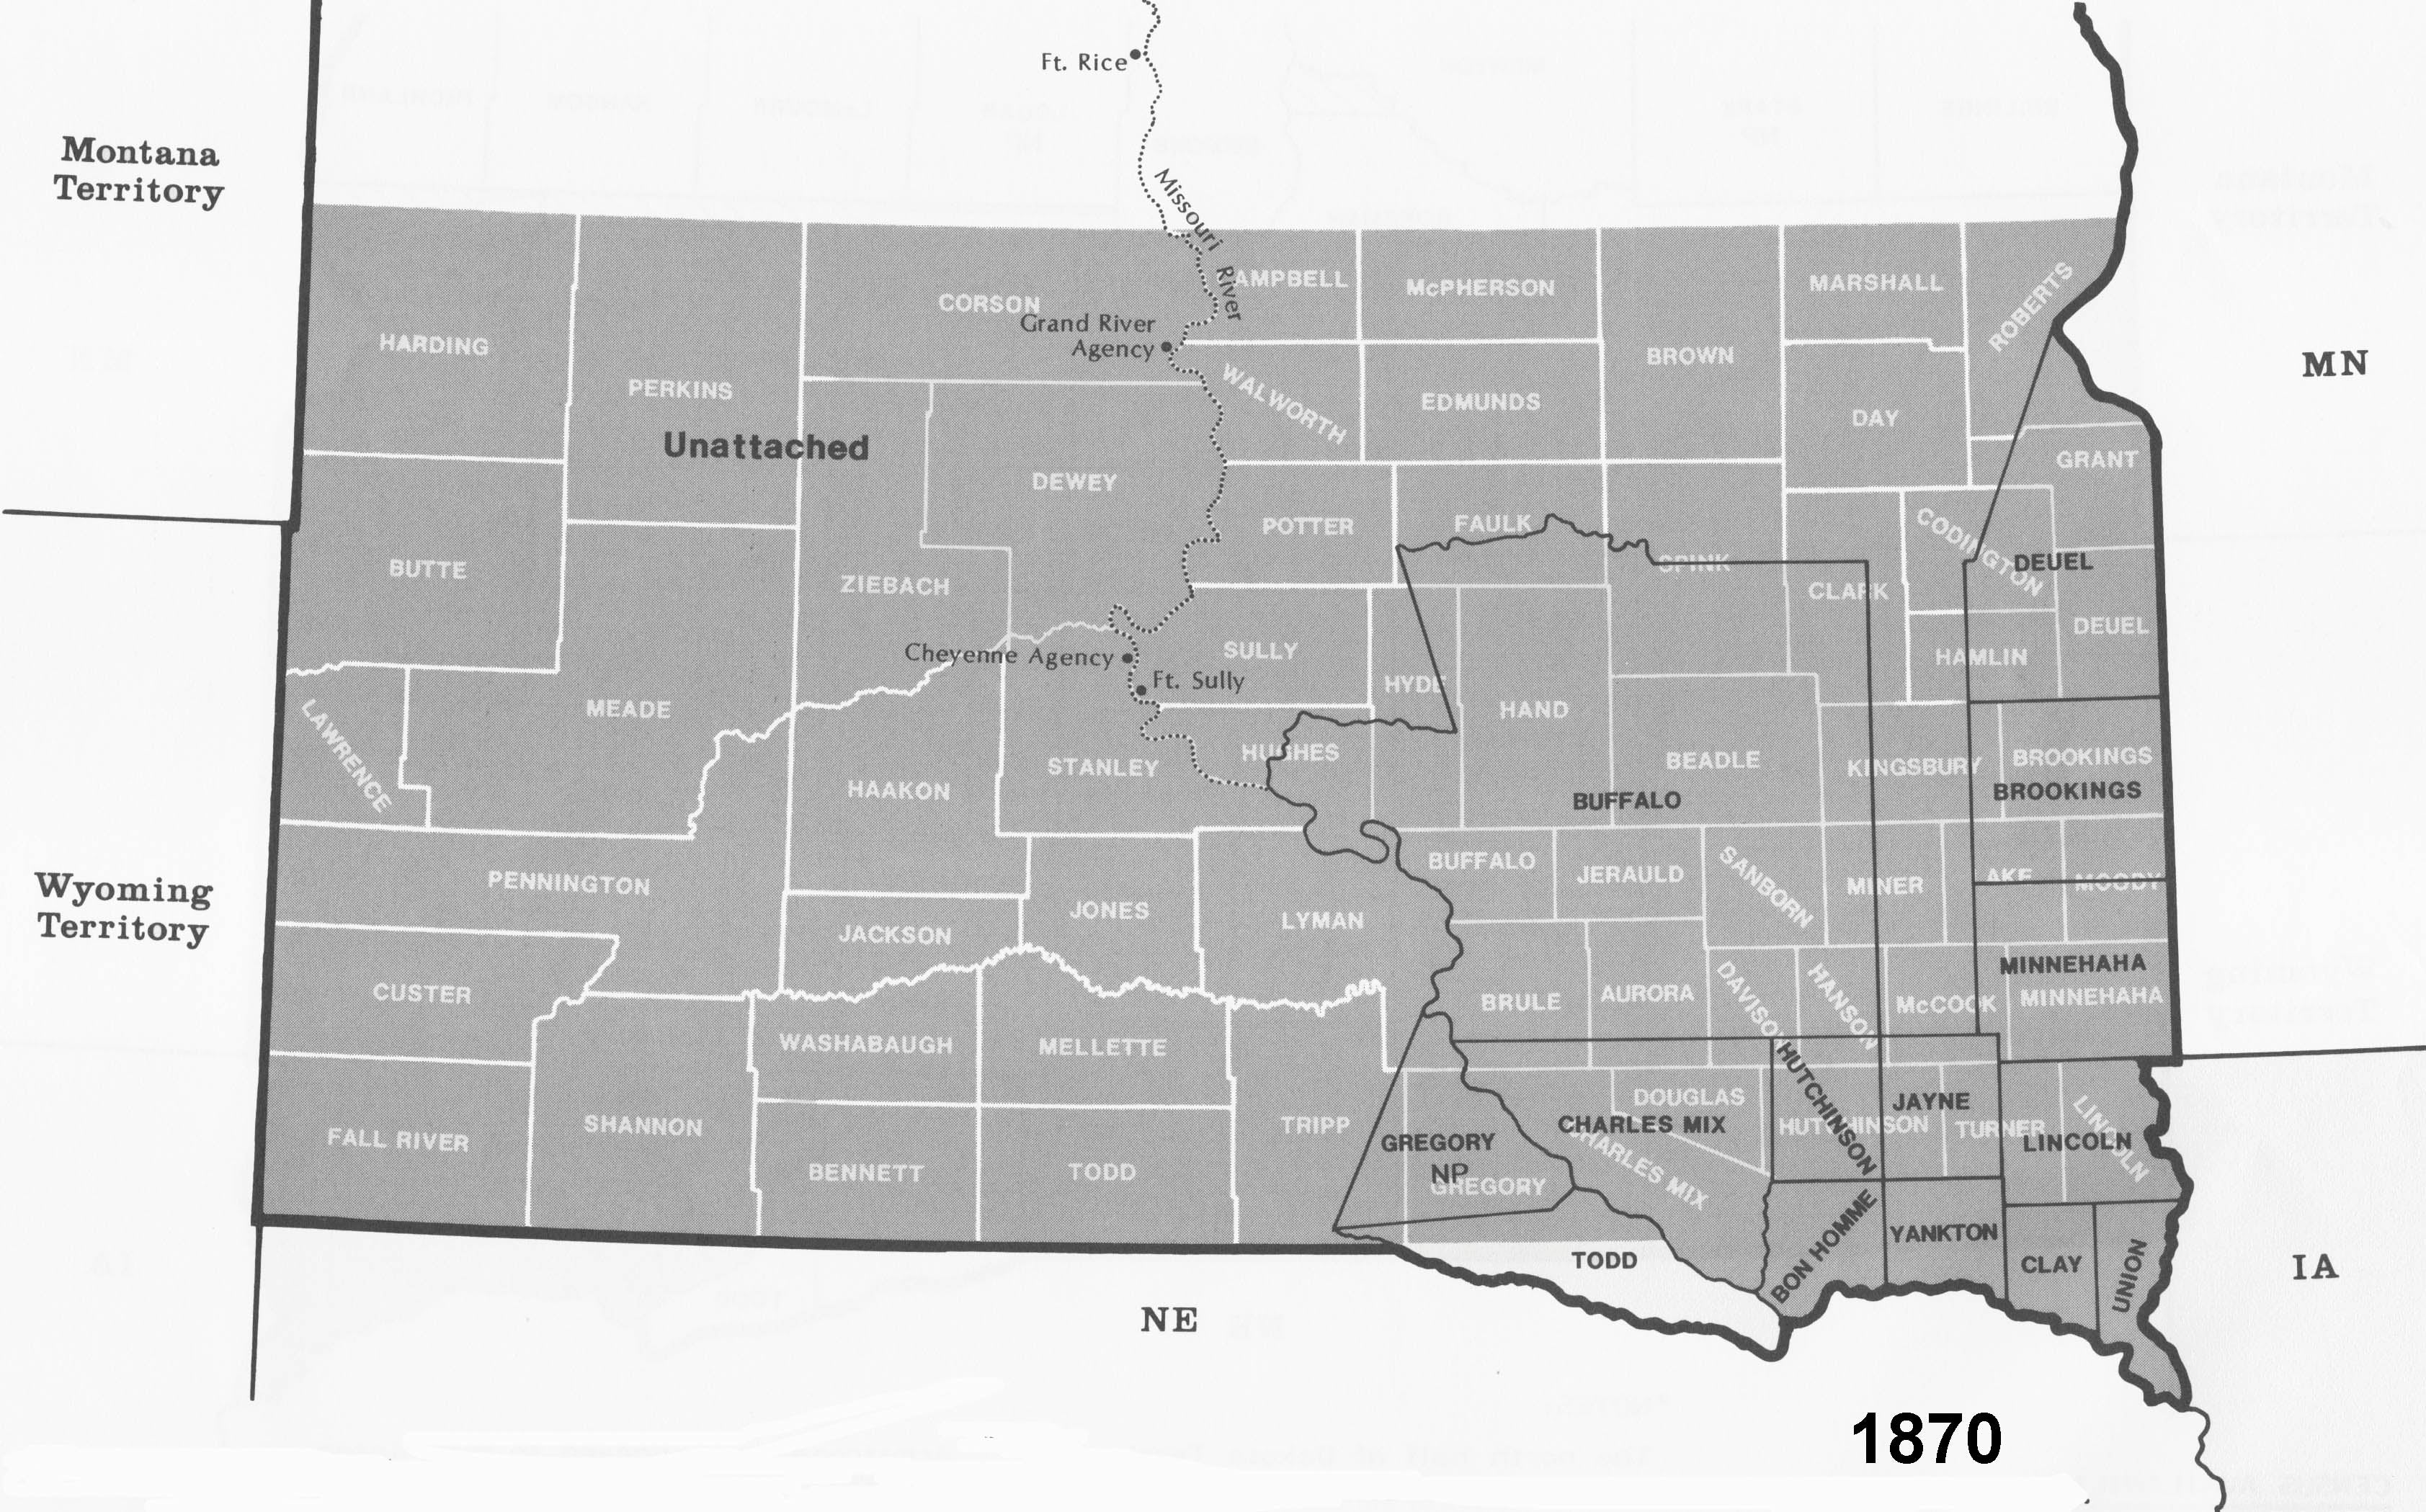 South Dakota Censuses & Substitute Name Lists 1859-2014 - SOFTBOUND